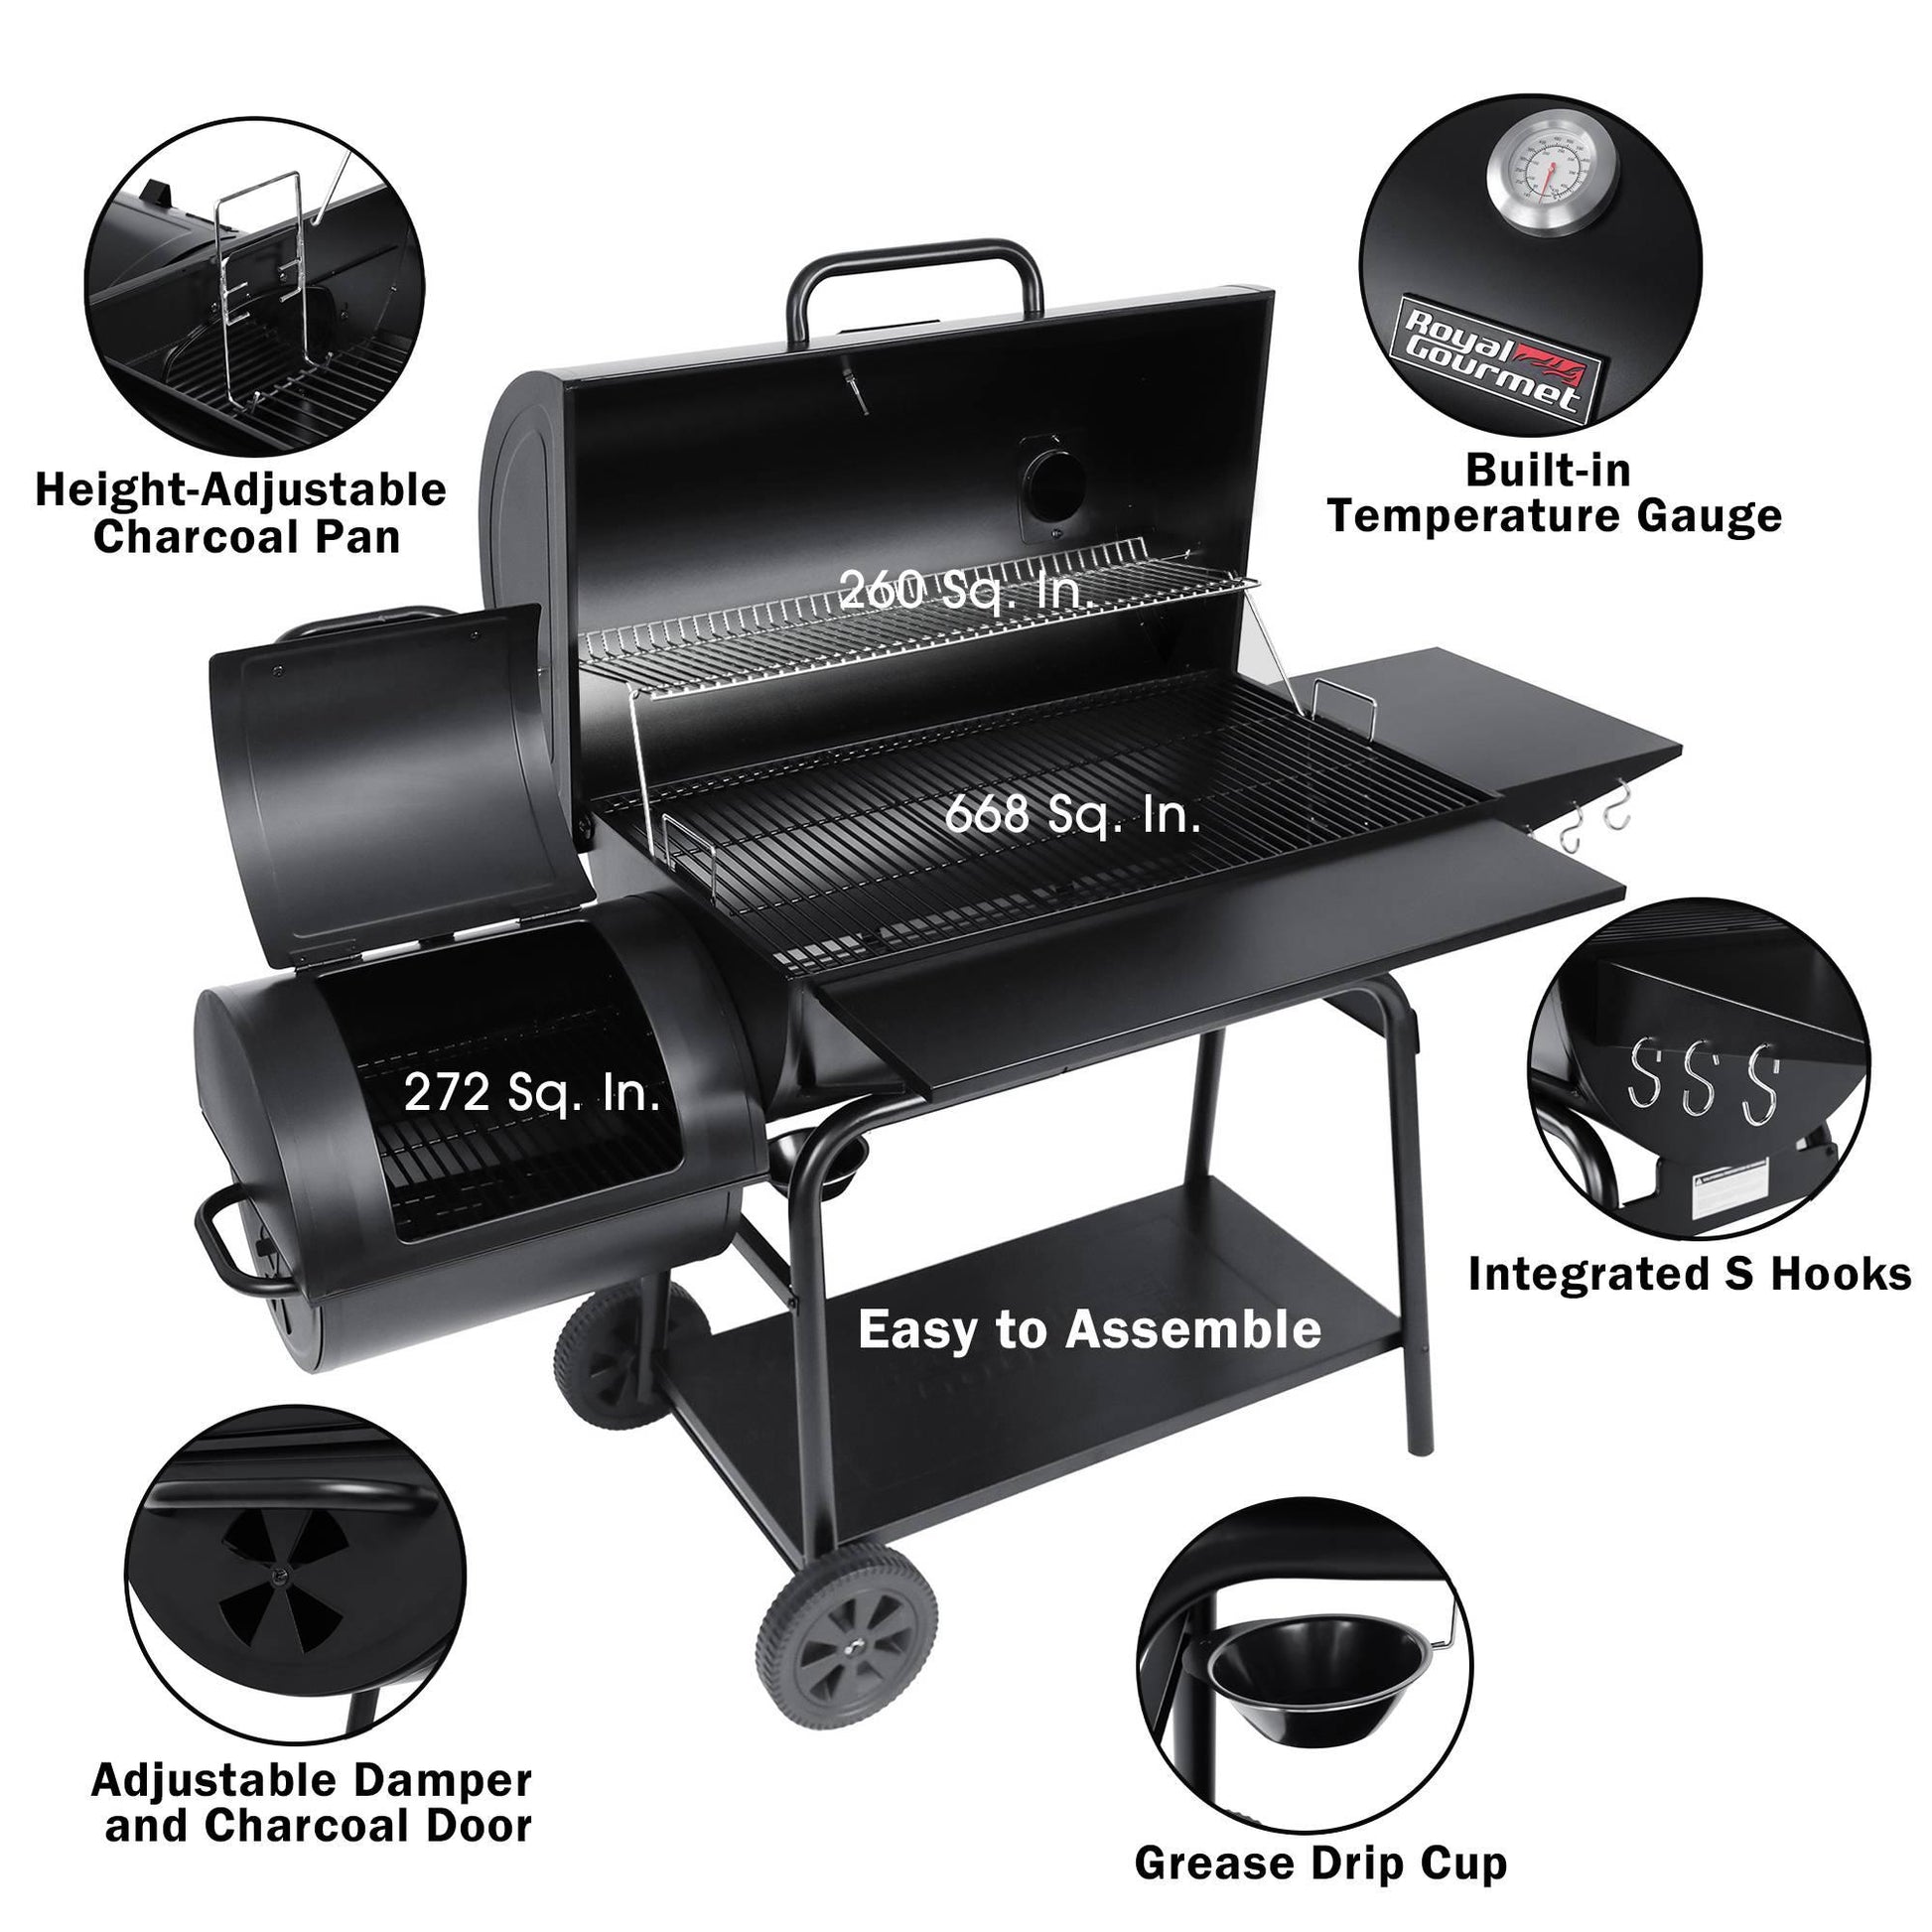 Charcoal Barrel Grill with Offset Smoker - Royal Gourmet